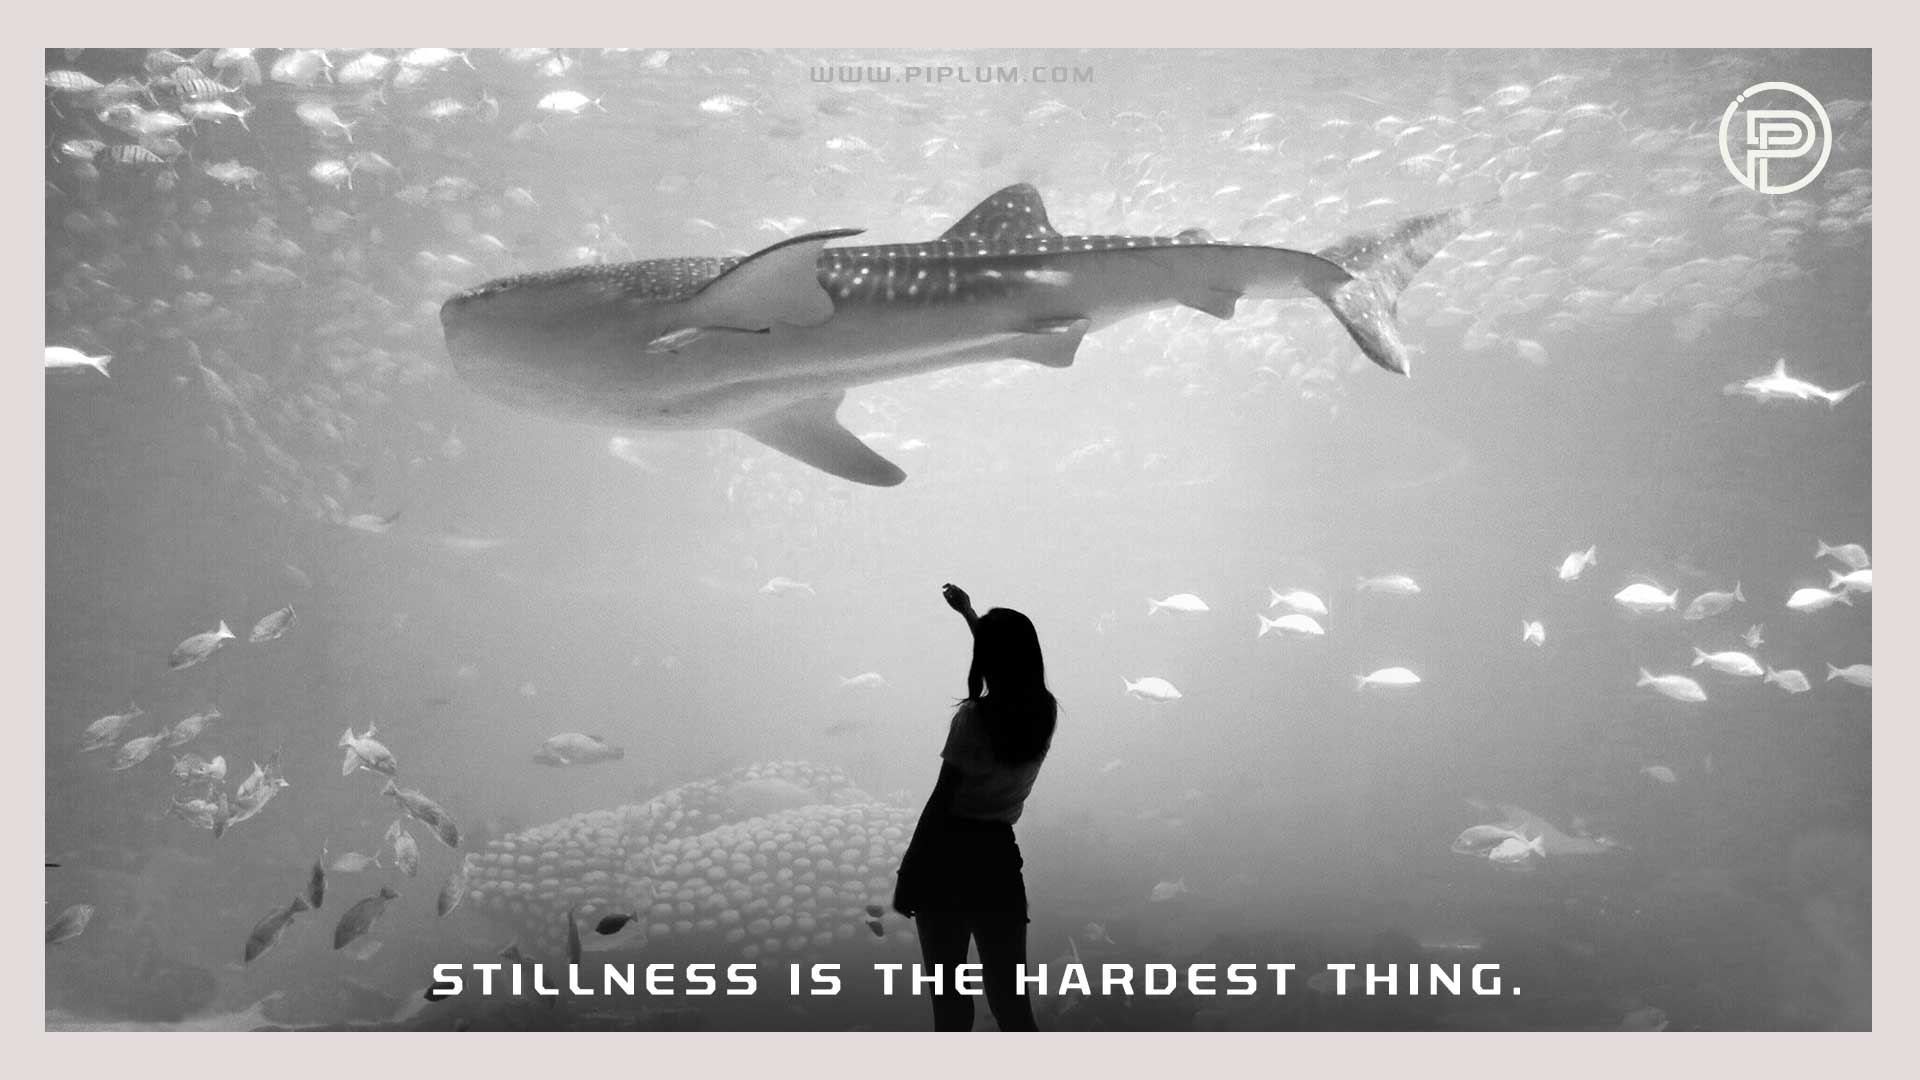  Stillness-is-the-hardest-thing-Motivational-crisis-quote